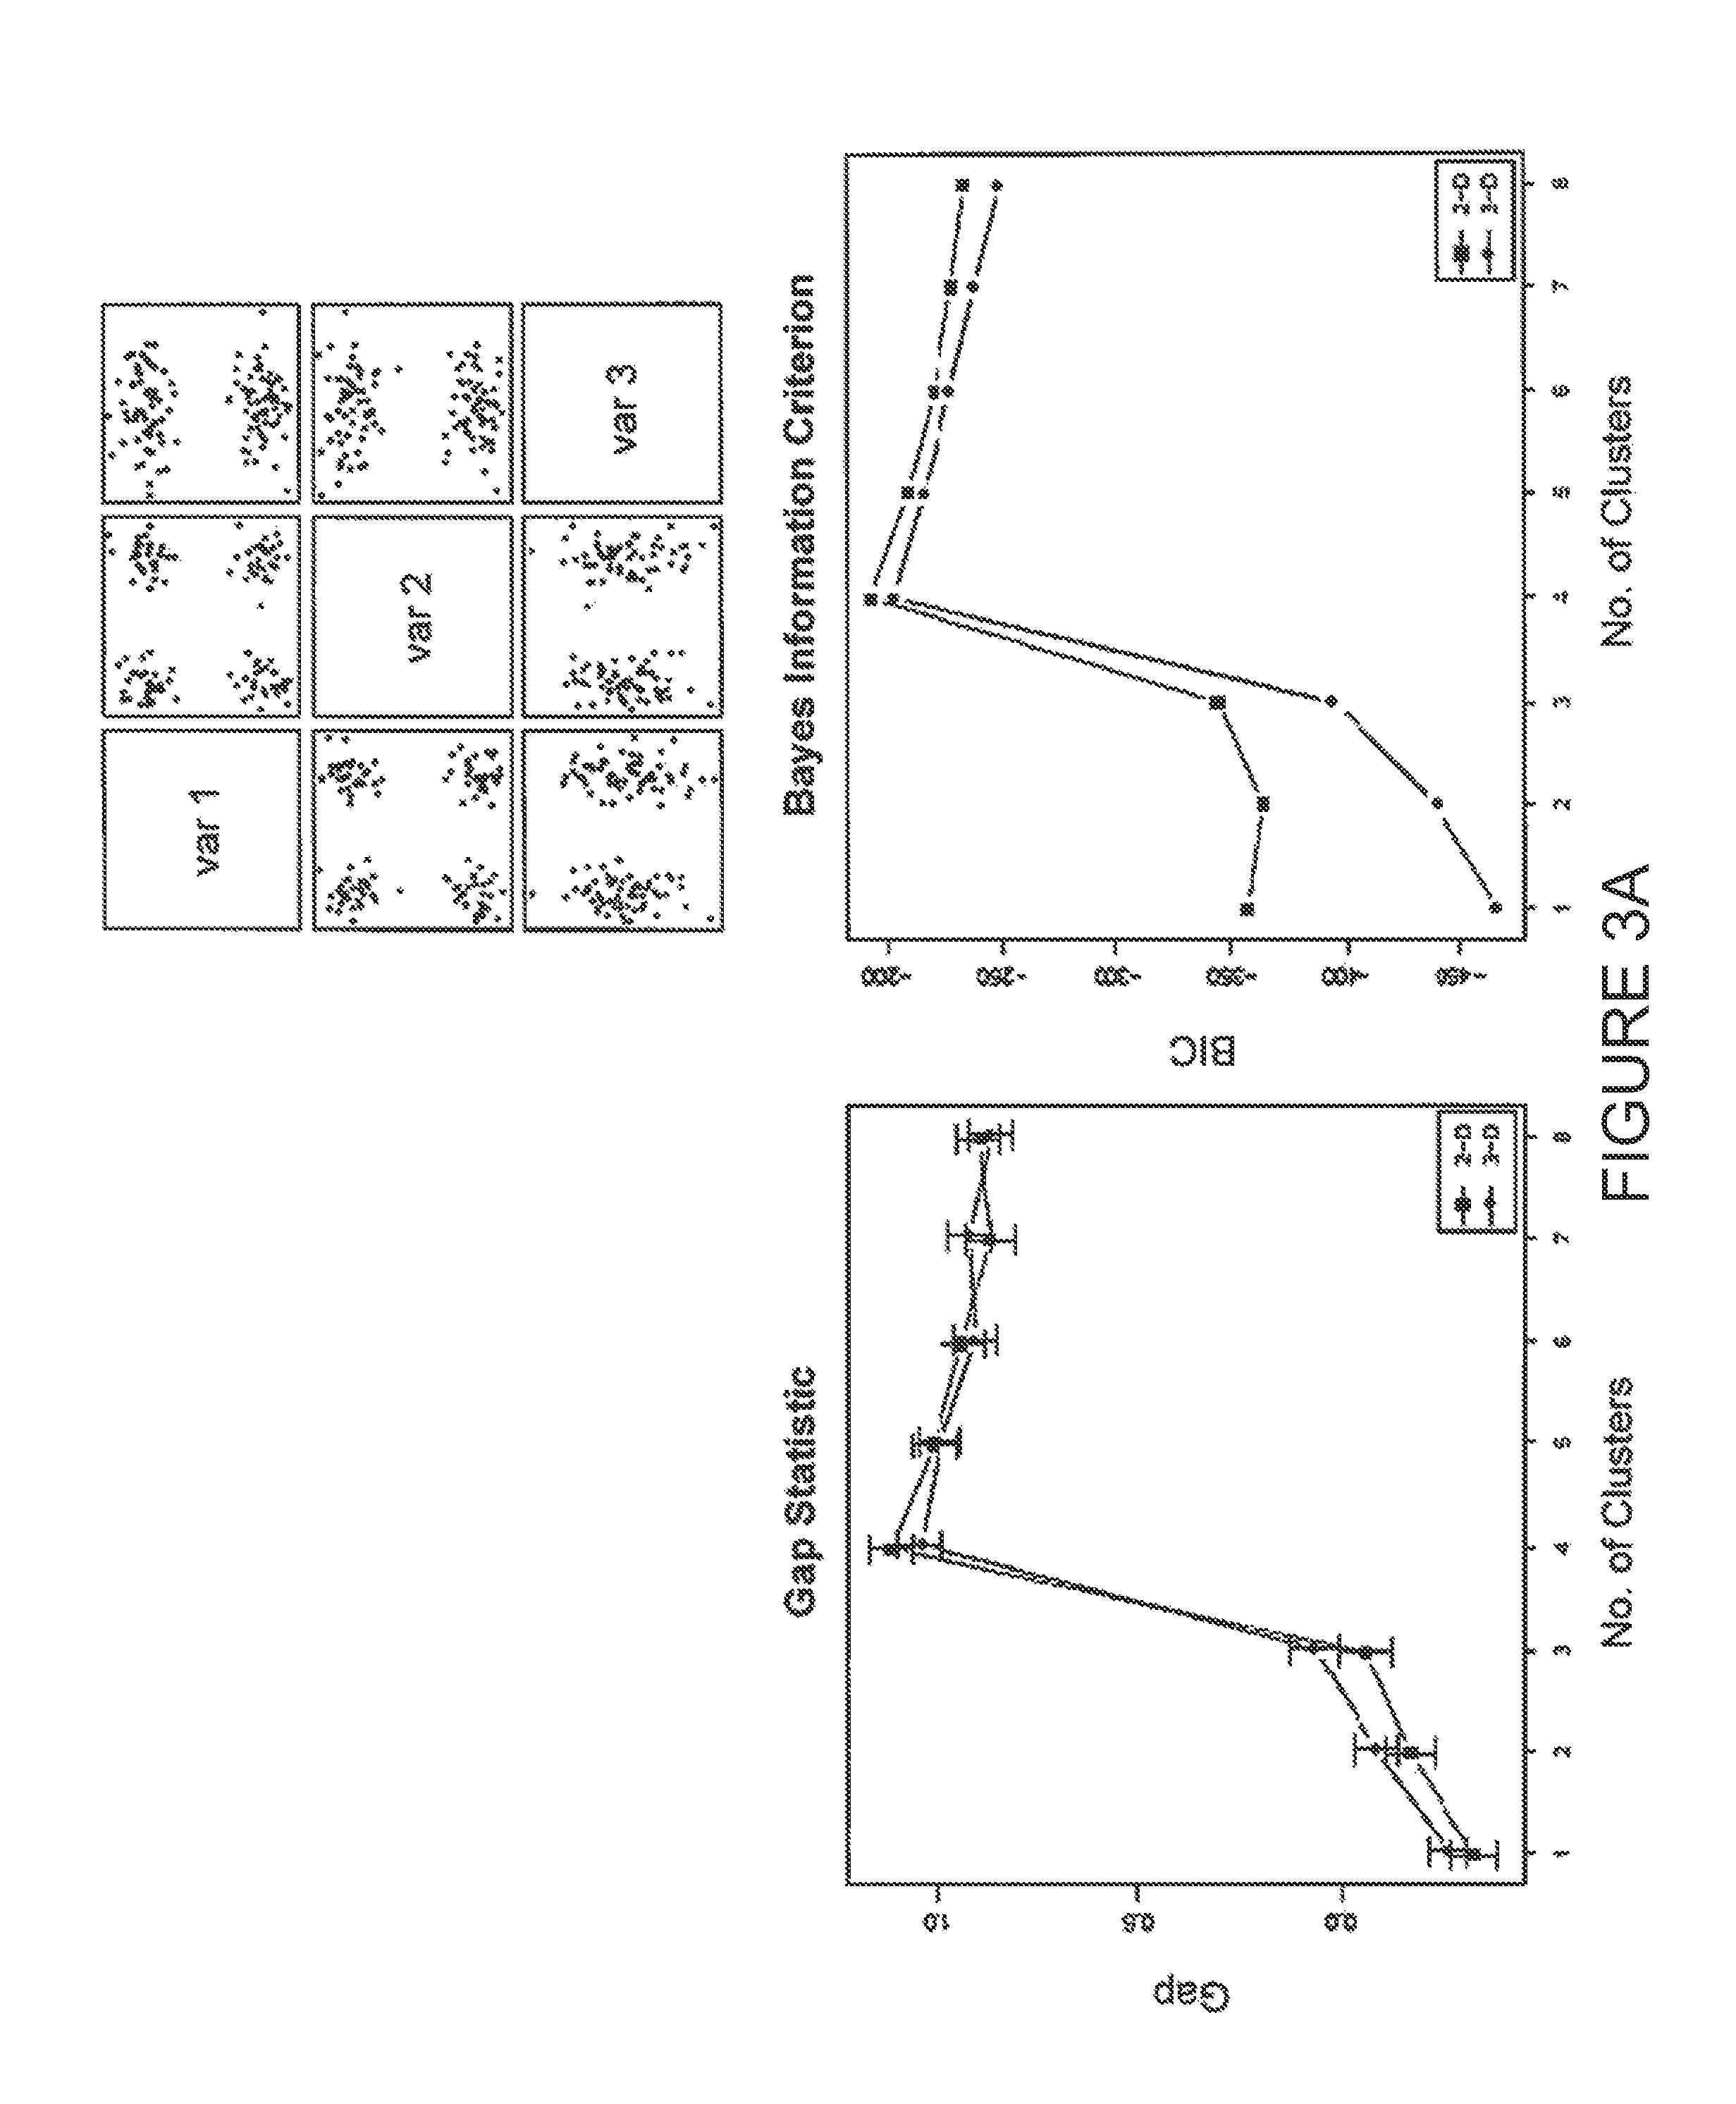 Method and system for analysis of melt curves, particularly dsDNA and protein melt curves